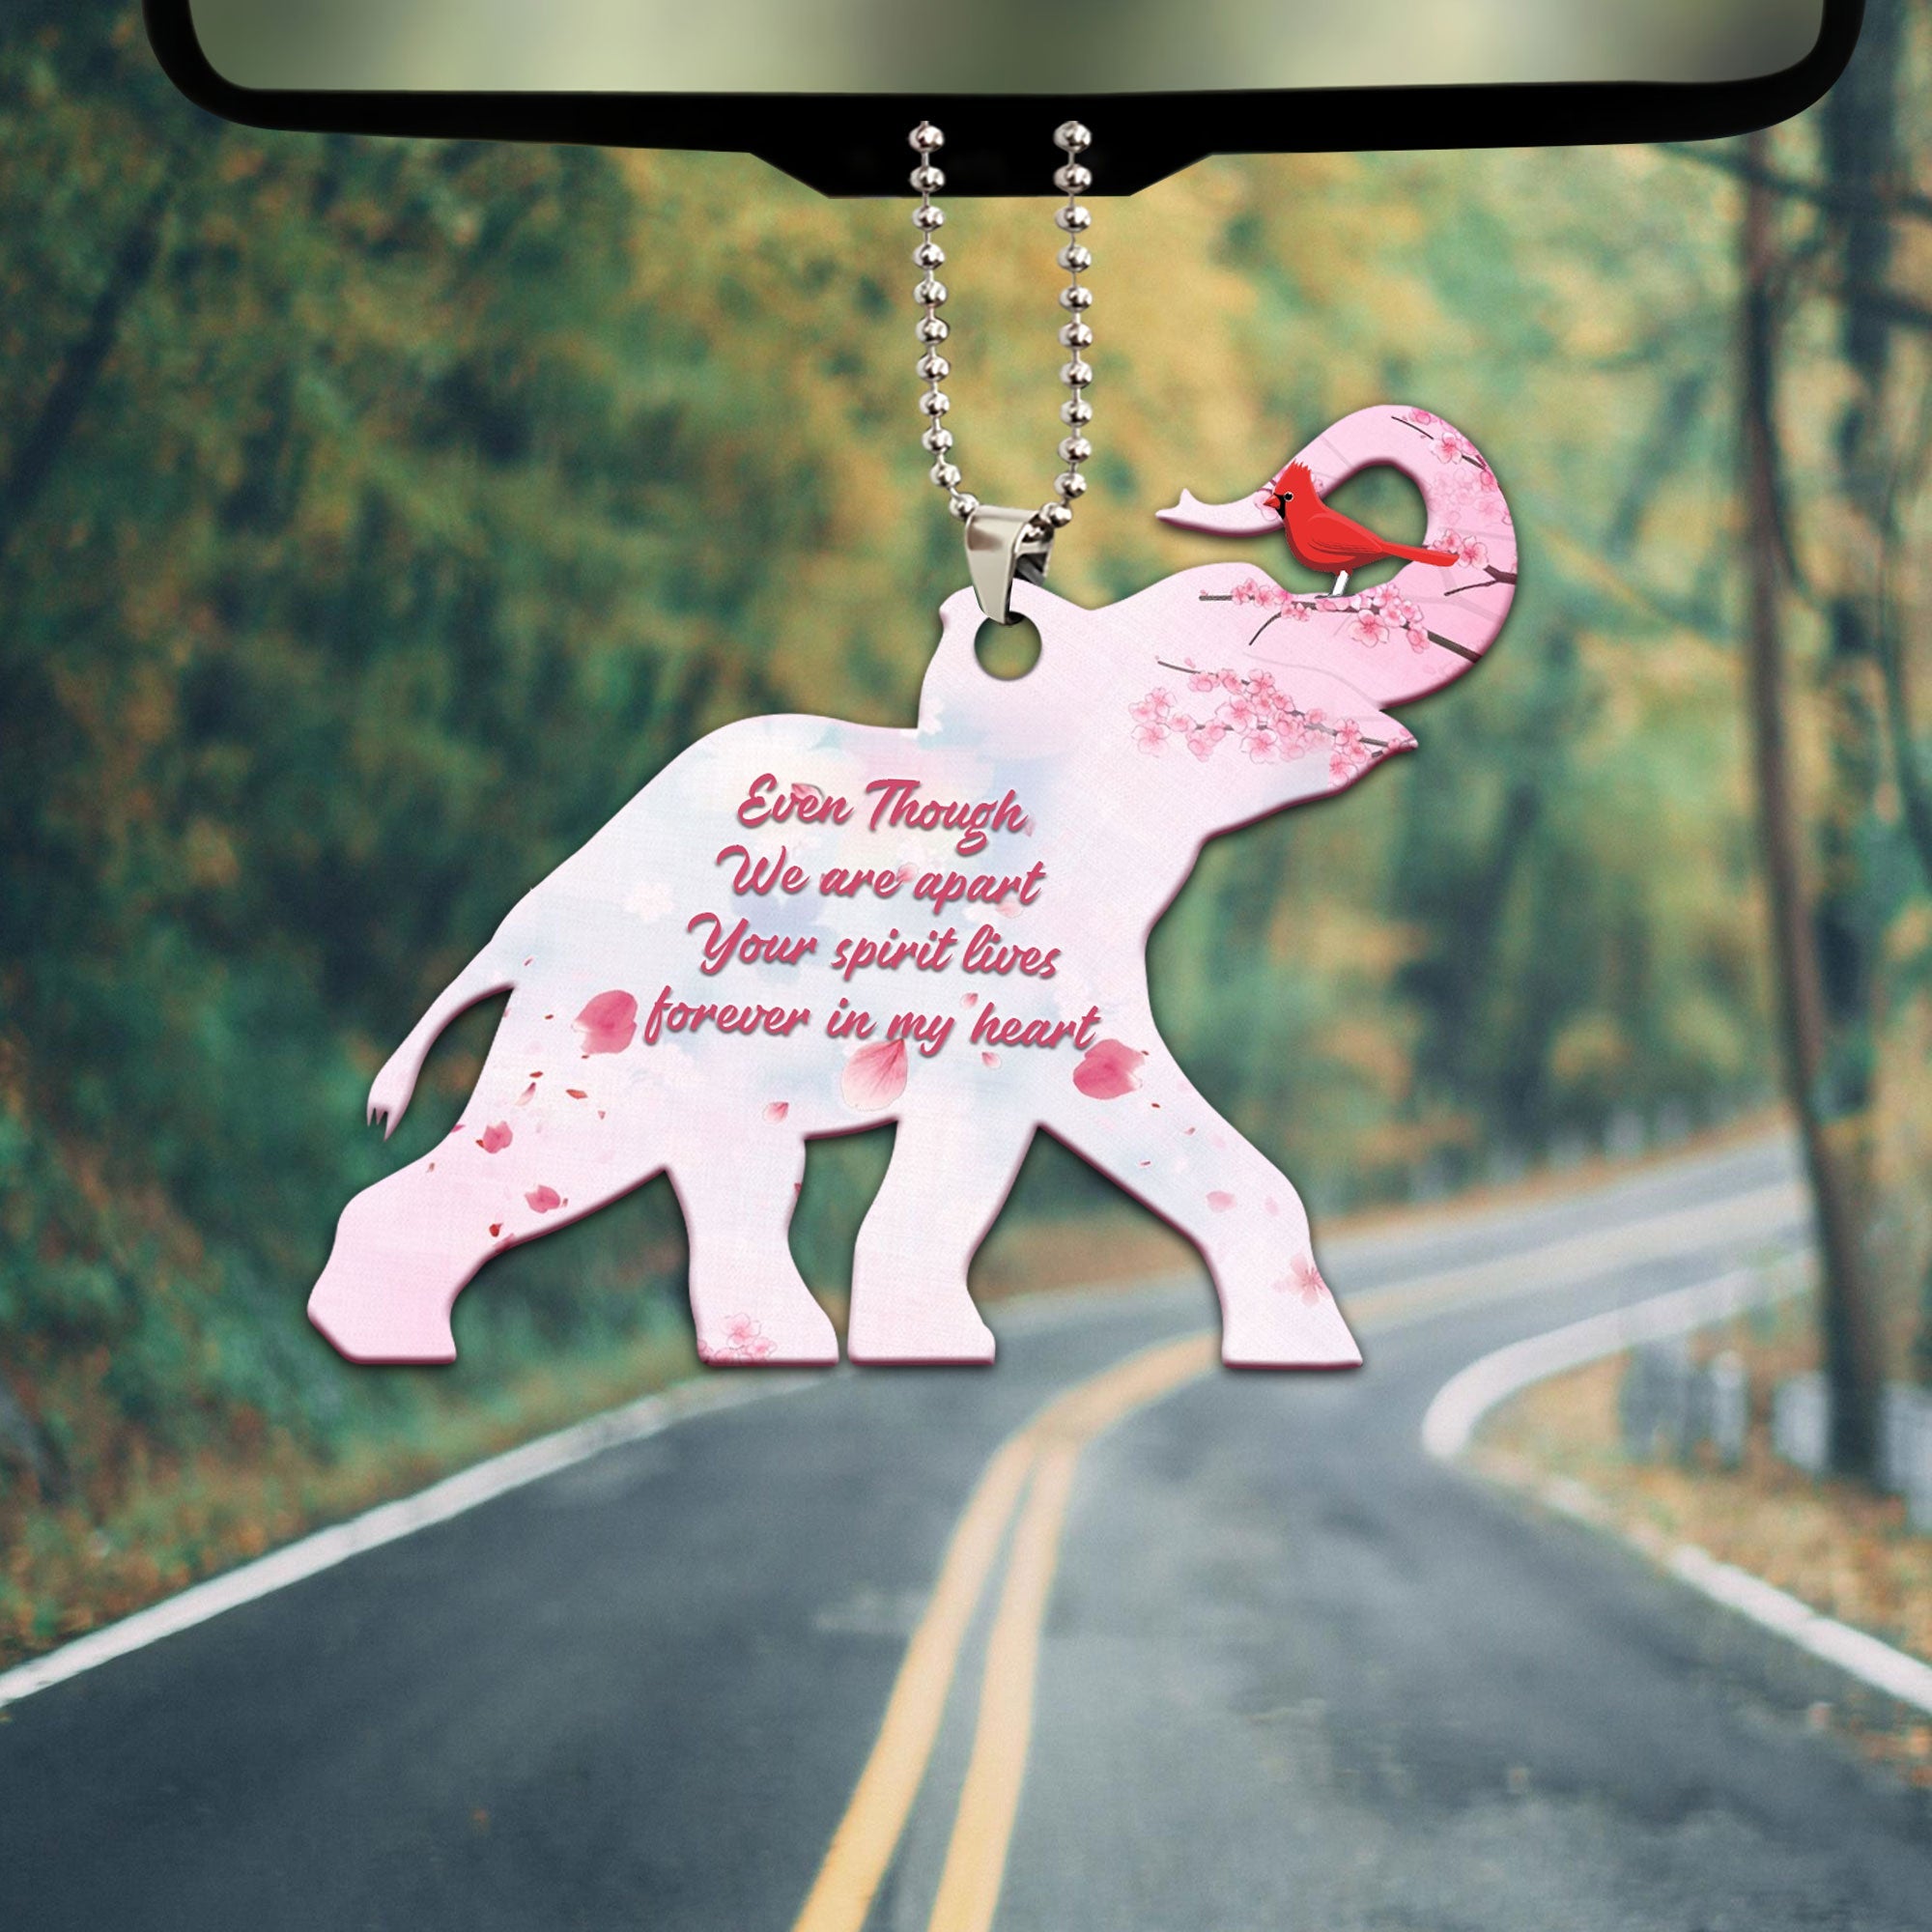 Cardinal Car Rear View Mirror Accessories Hanging Charm Pendant